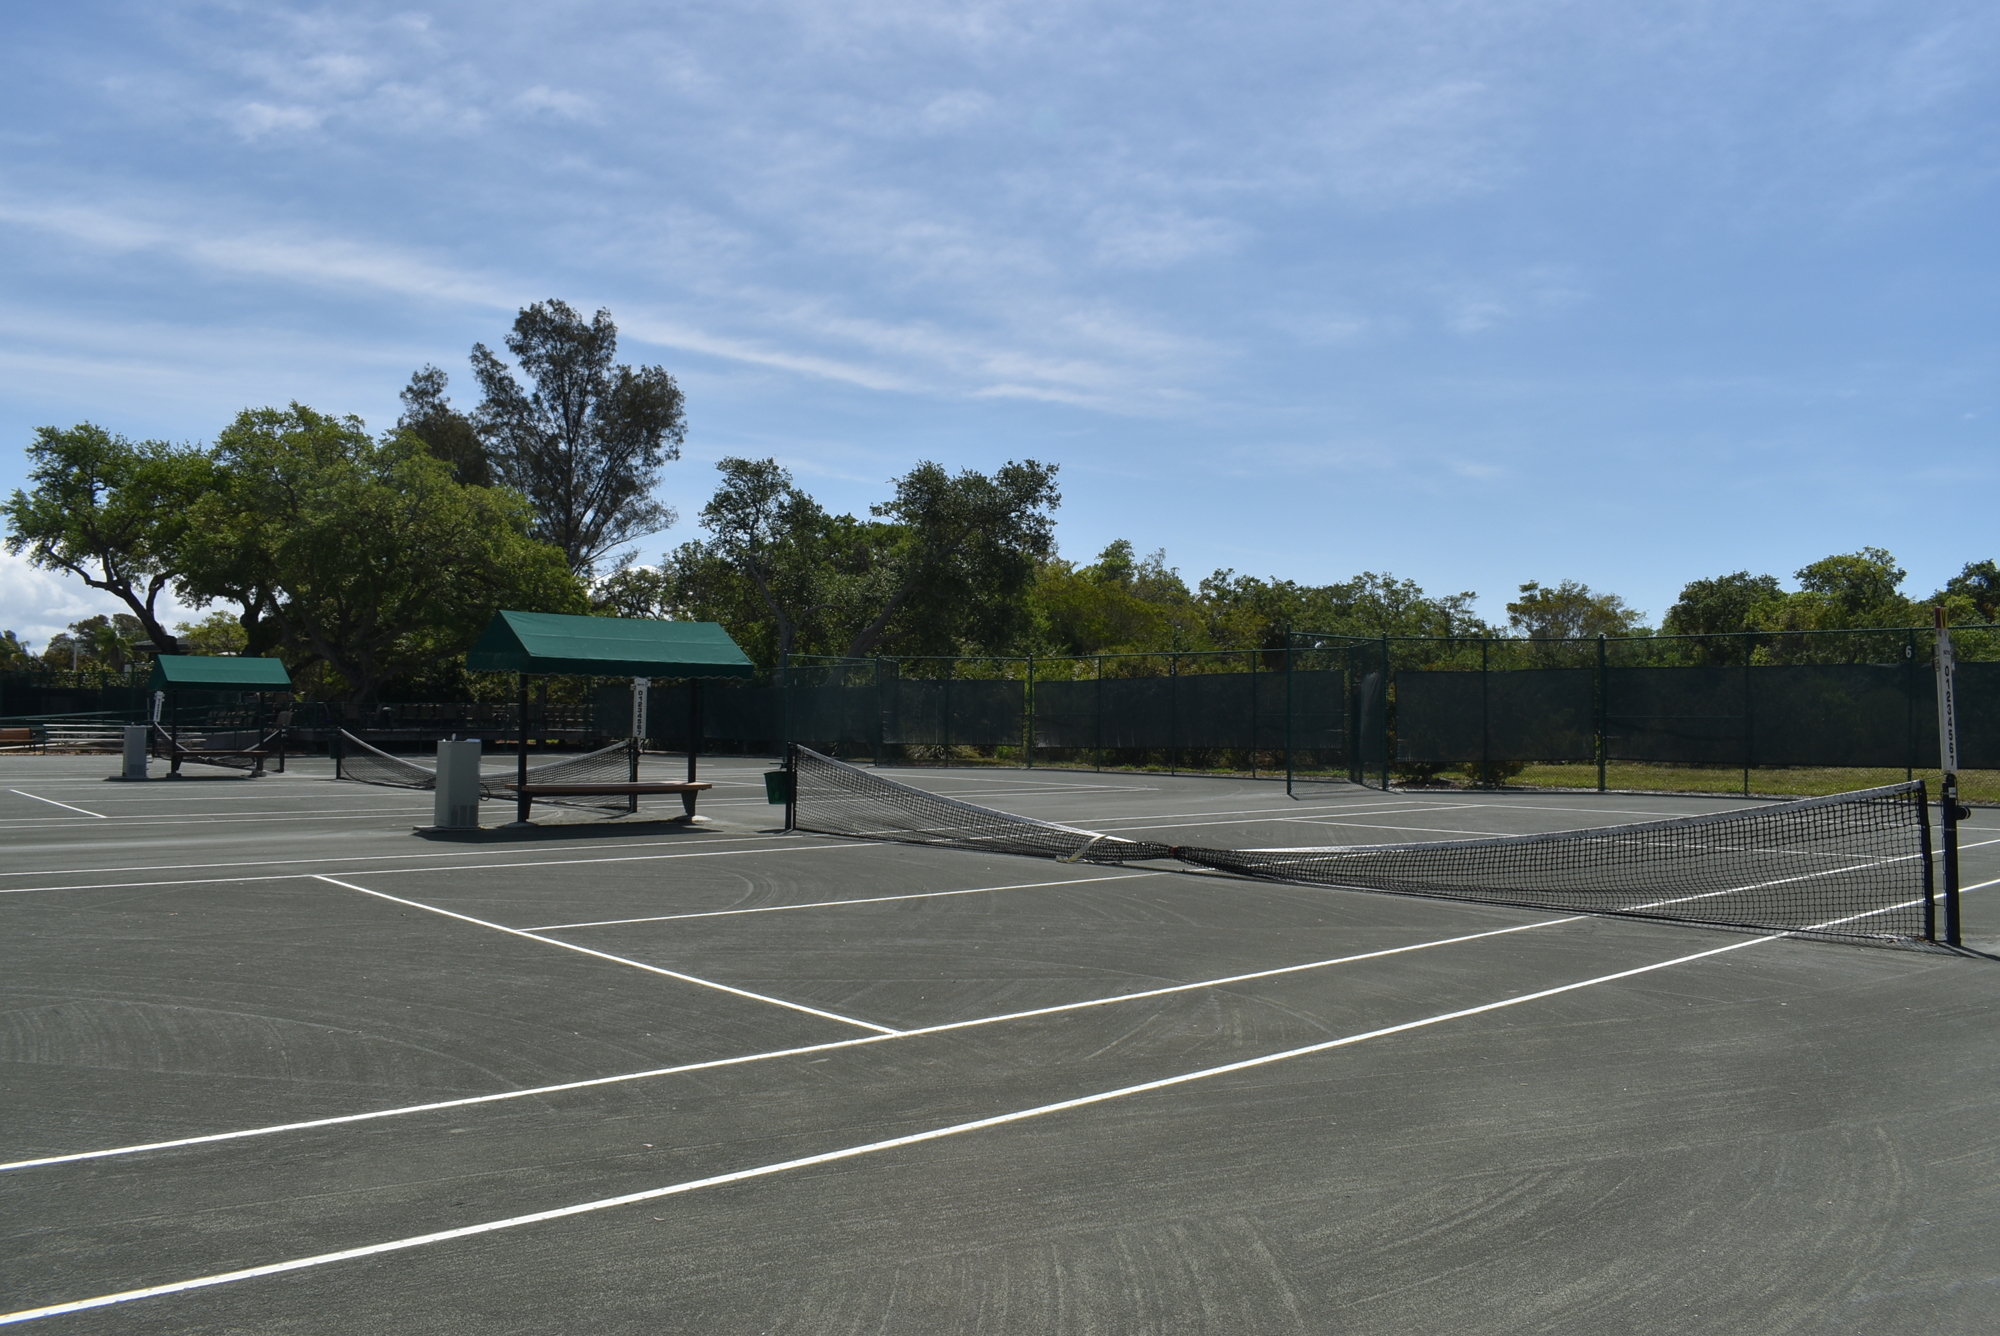 Courts sit unused at the Longboat Key Tennis Center. The facility closed Sunday amid concerns about COVID-19.